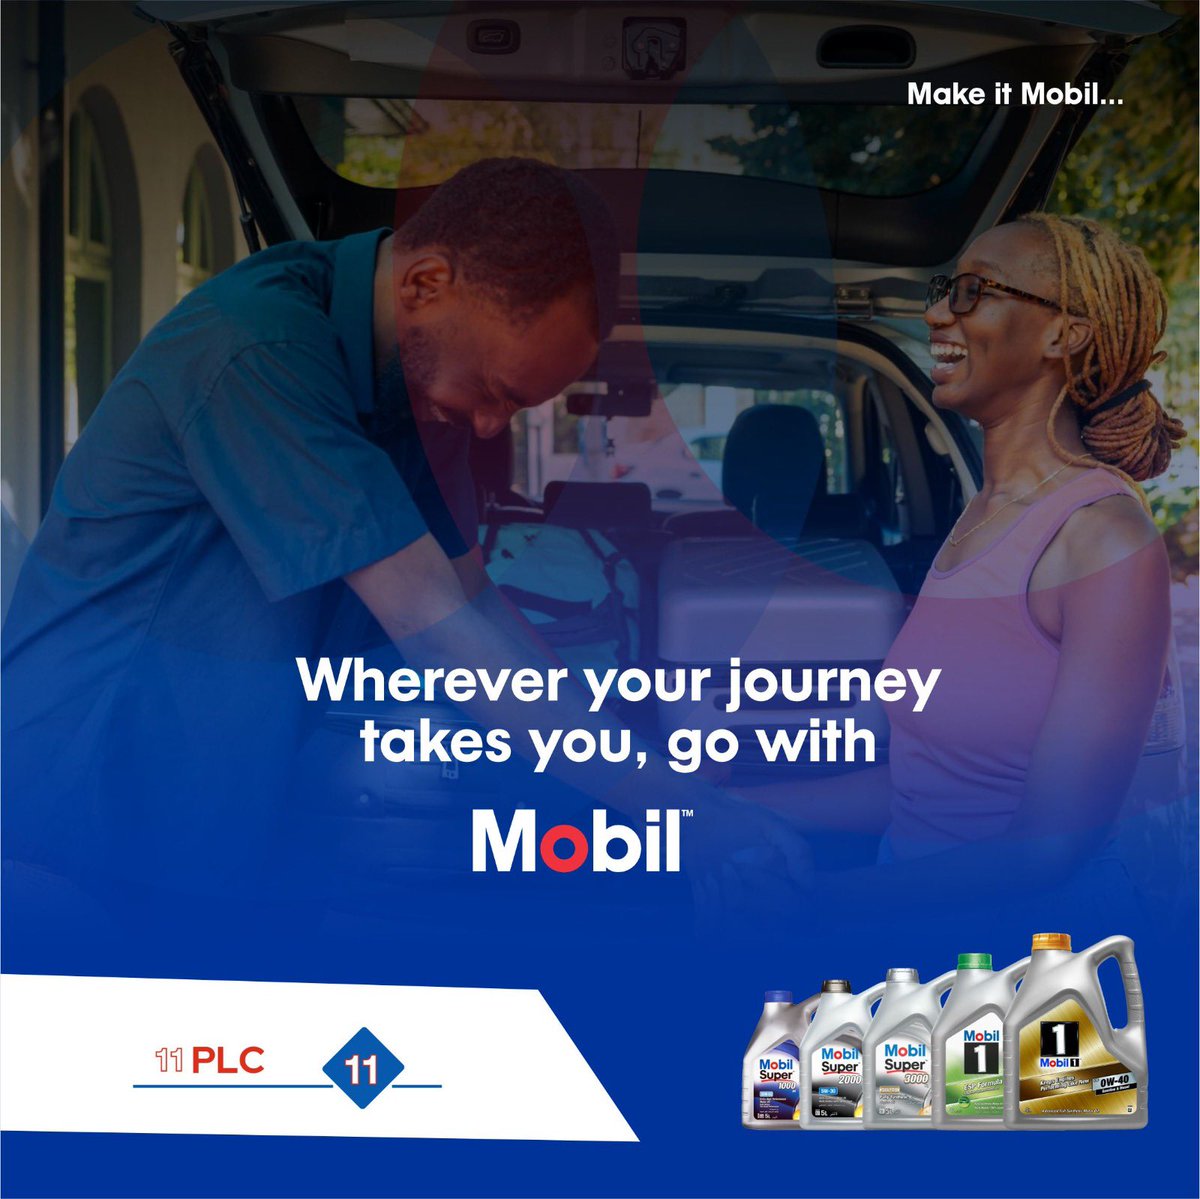 Don't let friction slow you down. Choose Mobil Lubricants for optimal performance.

#engineperformance #protectionandperformance #mobillubricants #11plc